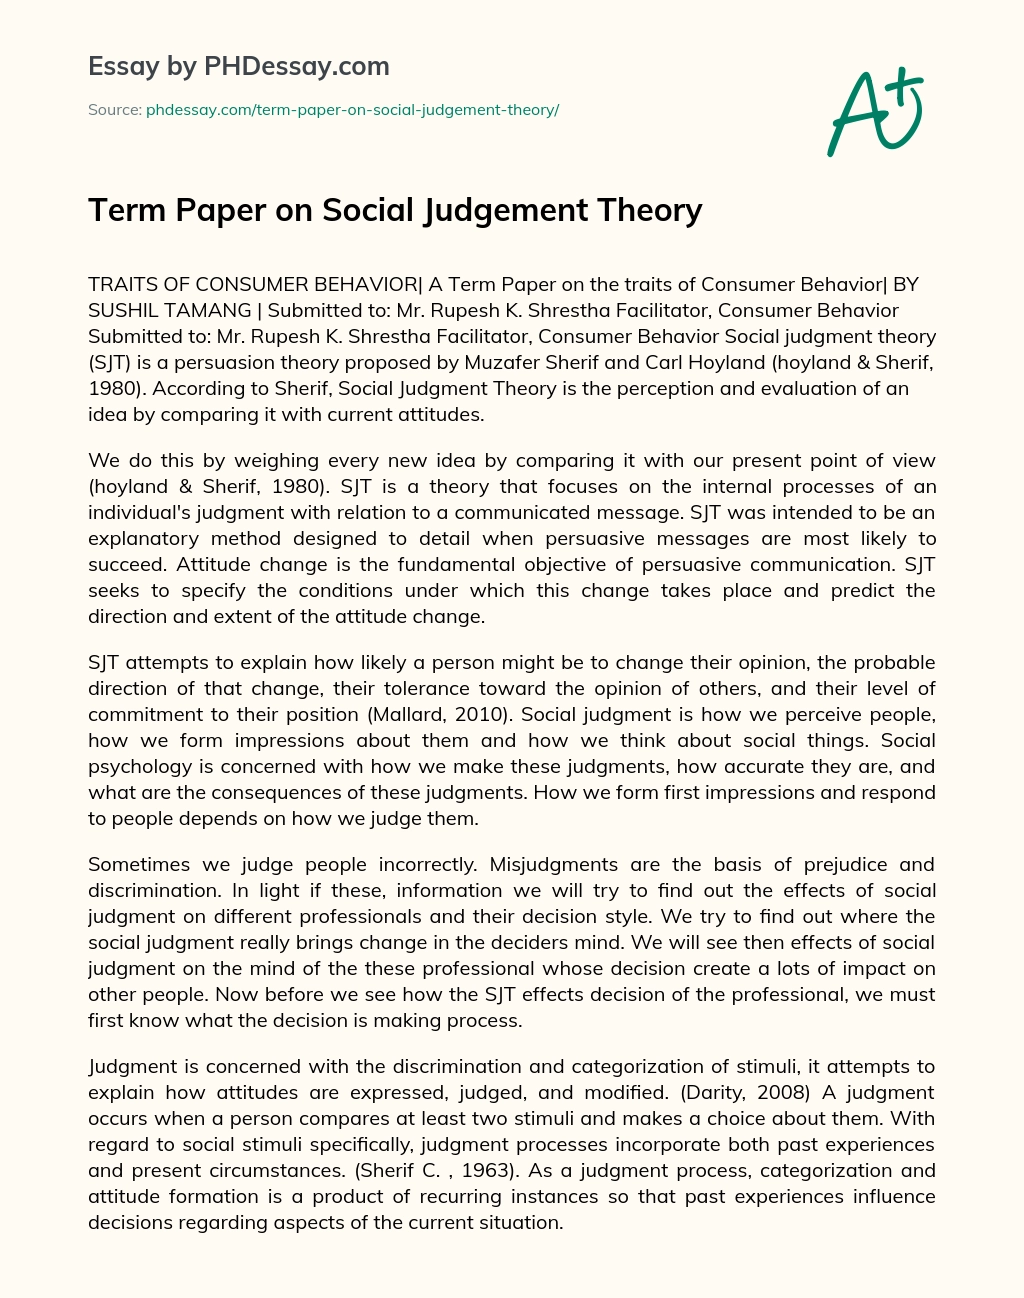 Term Paper on Social Judgement Theory essay